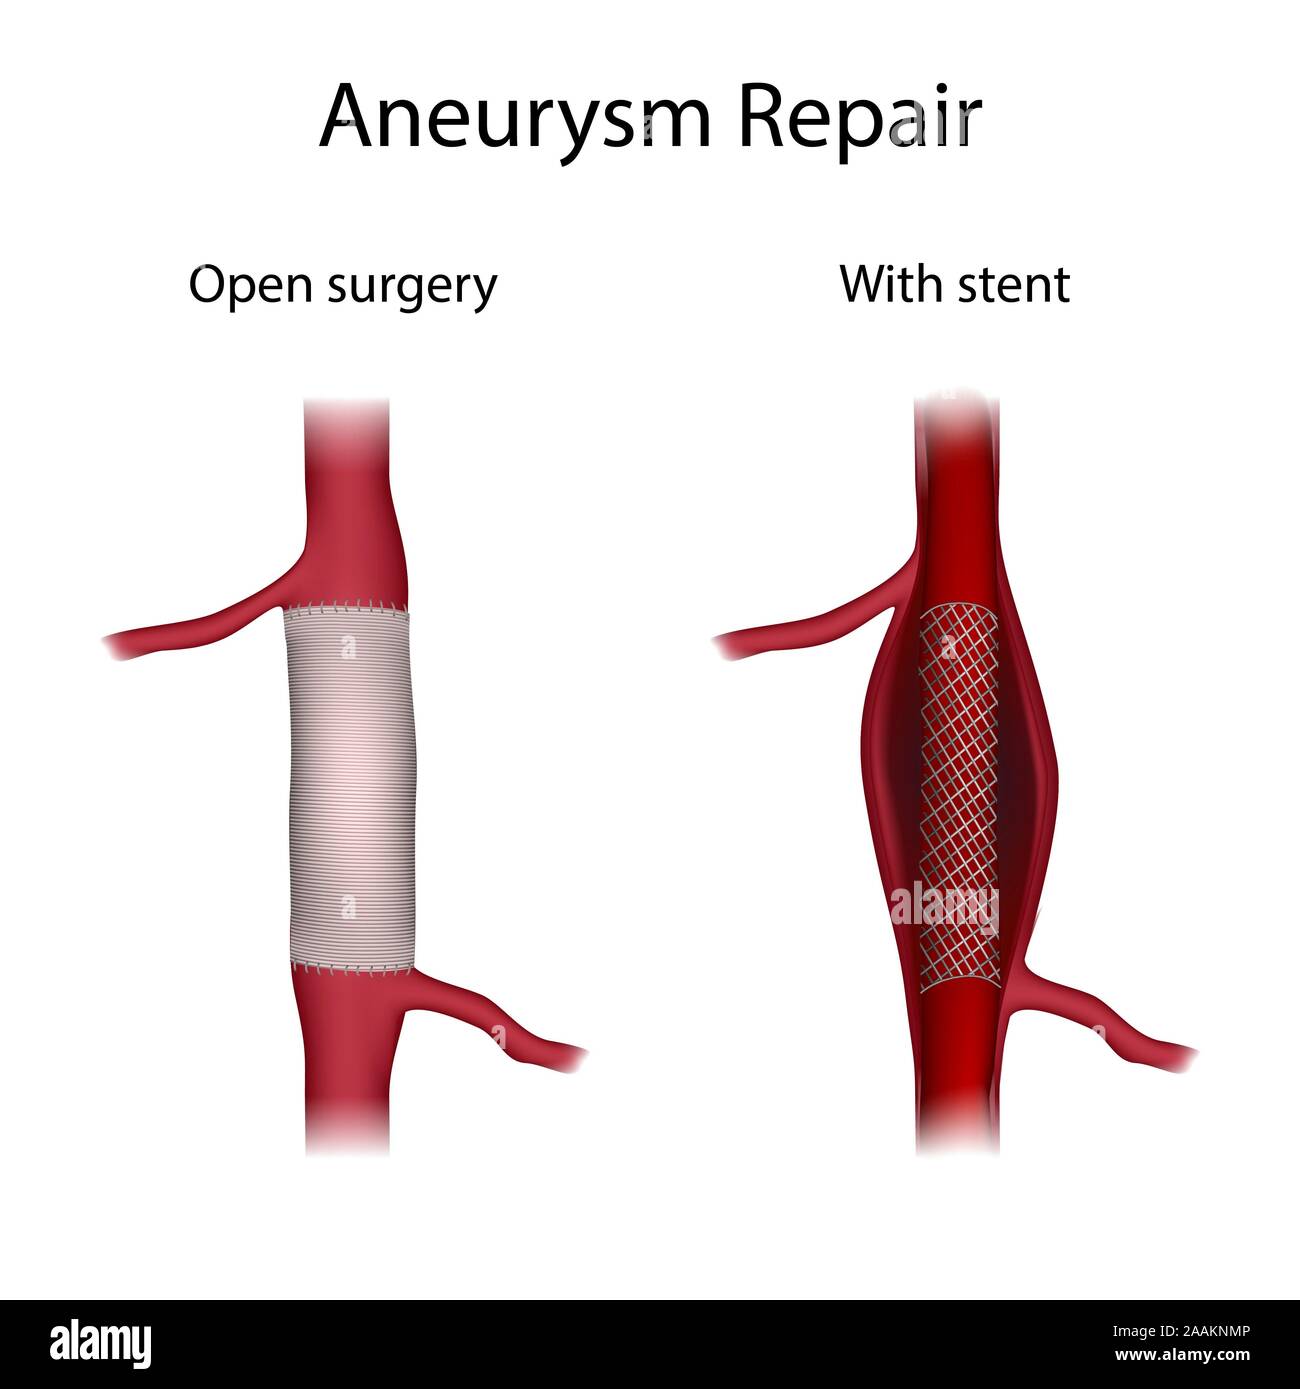 Aneurysm repair, illustration. Comparison of open surgery and stenting. Stock Photo